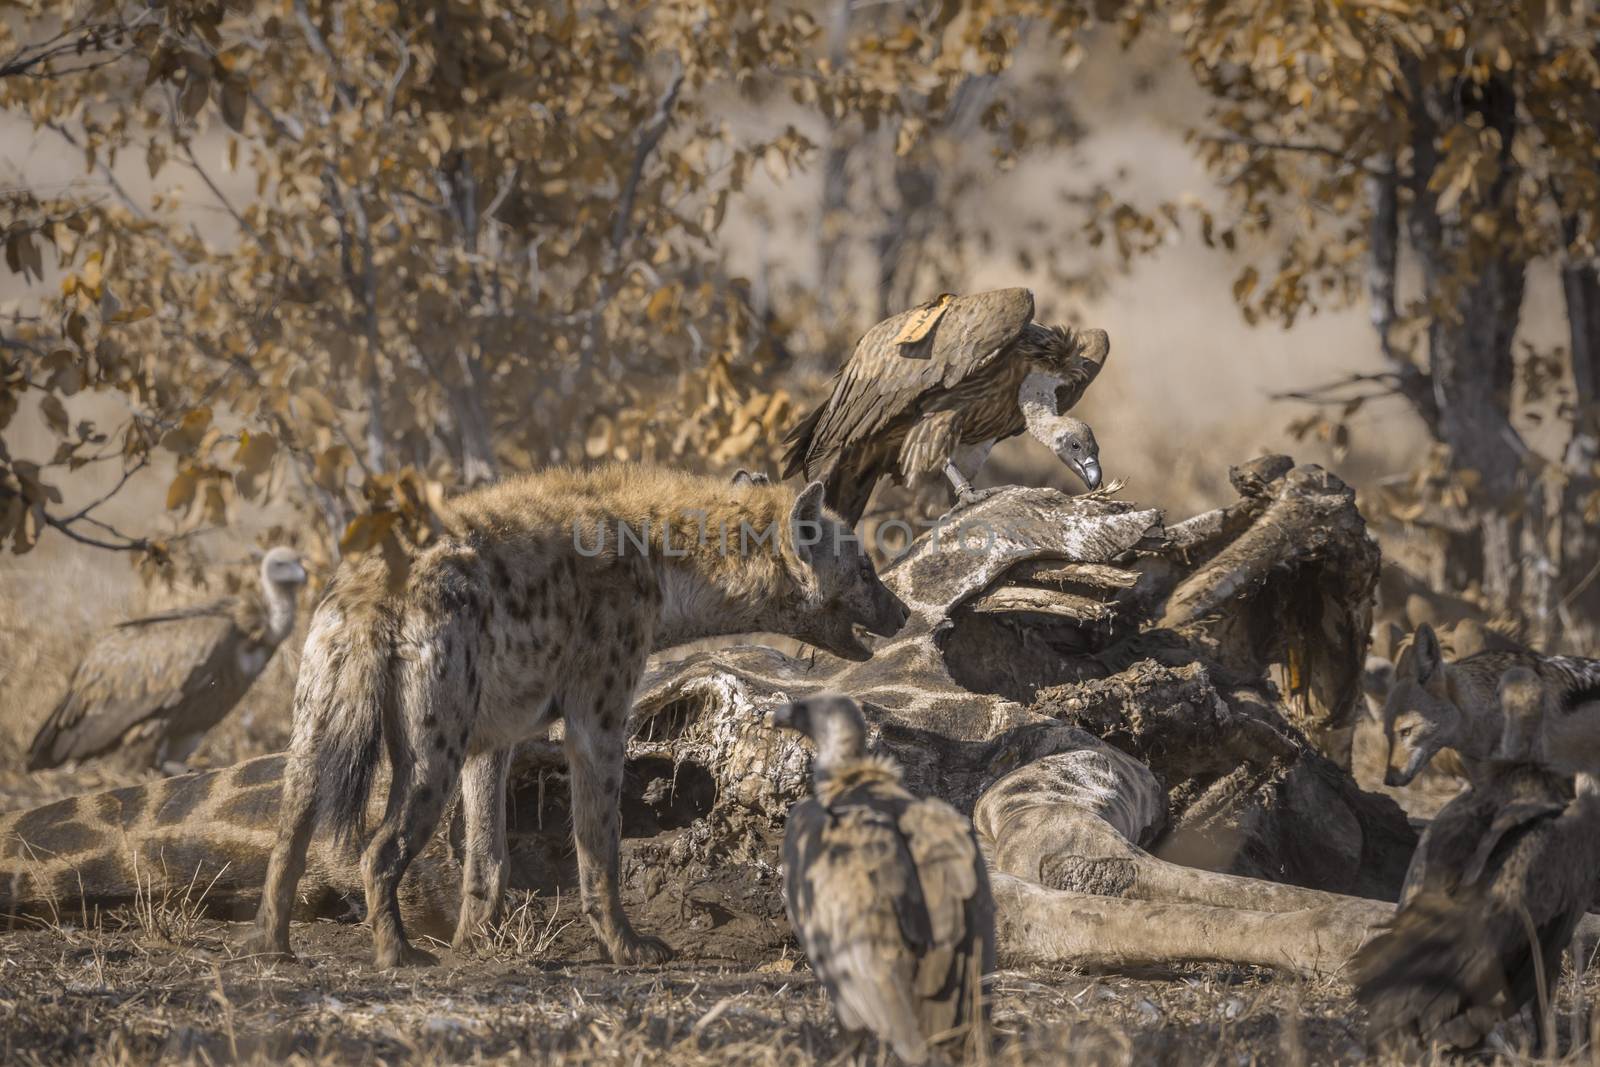 Spotted hyaena chasing white-backed vultures from a carcass in Kruger National park, South Africa ; Specie Crocuta crocuta family of Hyaenidae